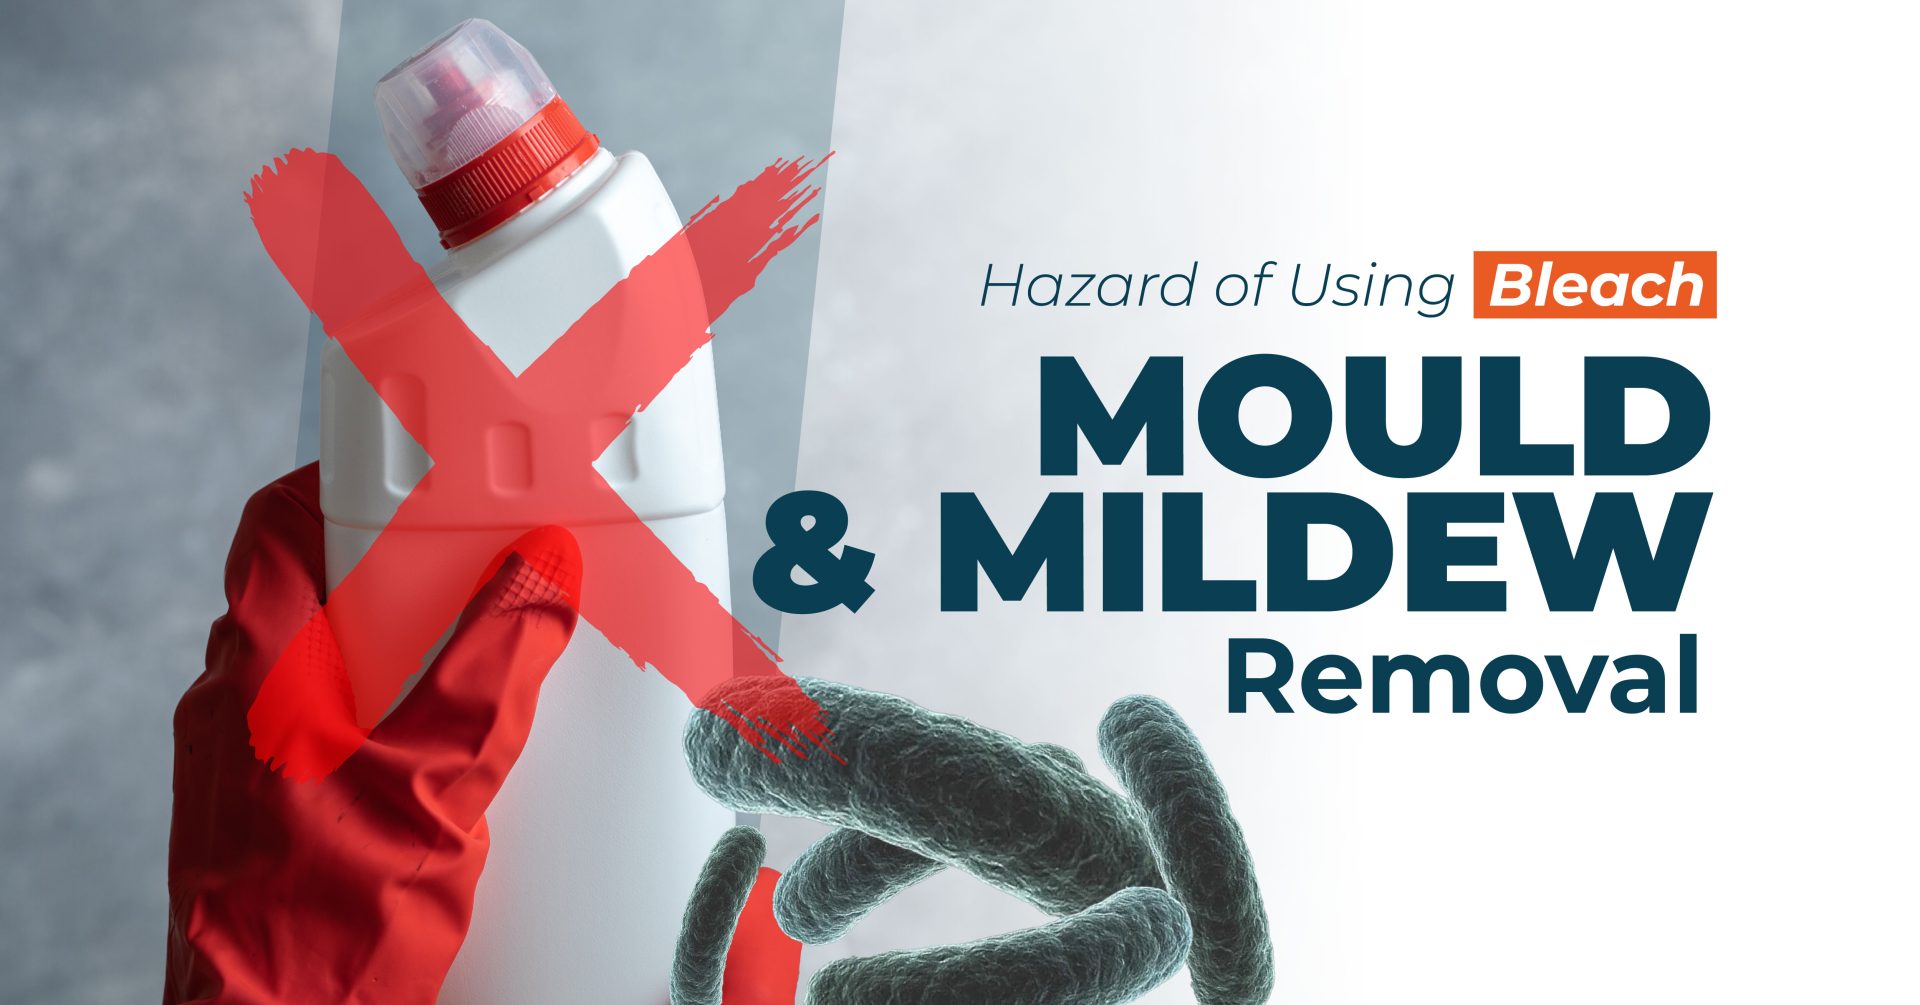 Hazards of Using Bleach for Mould Removal | ORAPI Asia